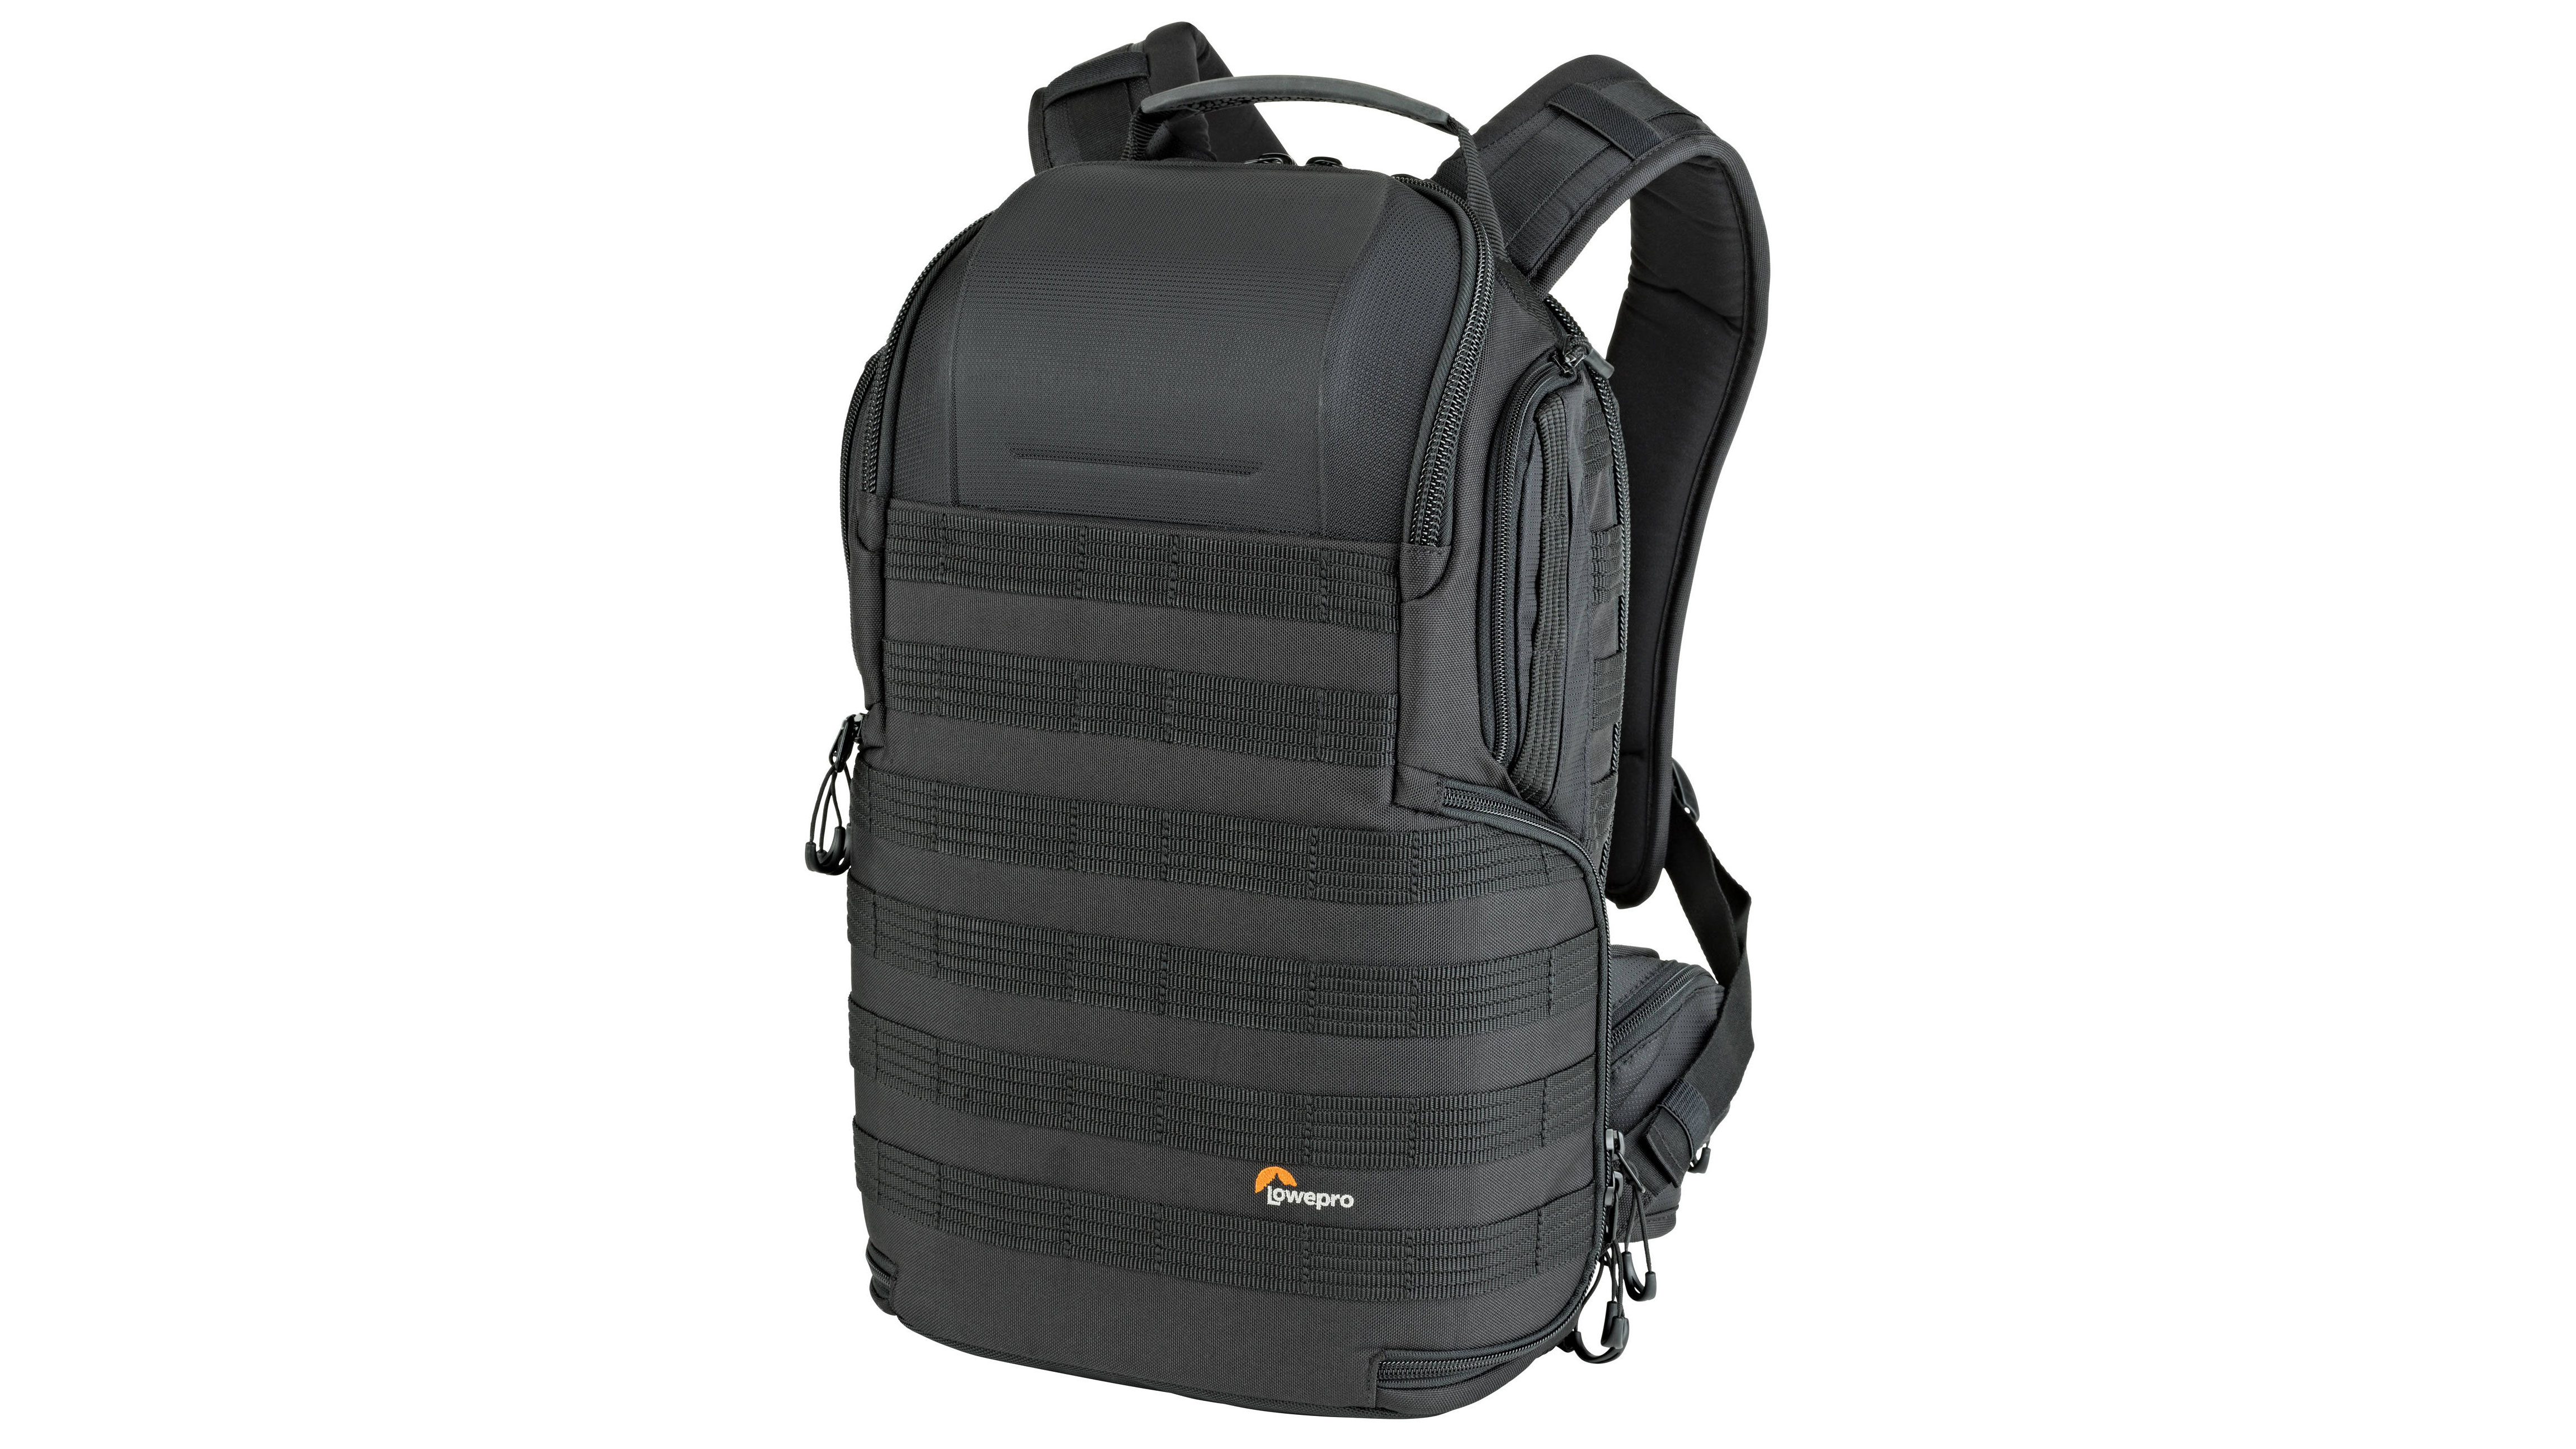 Best camera bags and cases: Lowepro ProTactic BP 350 AW II